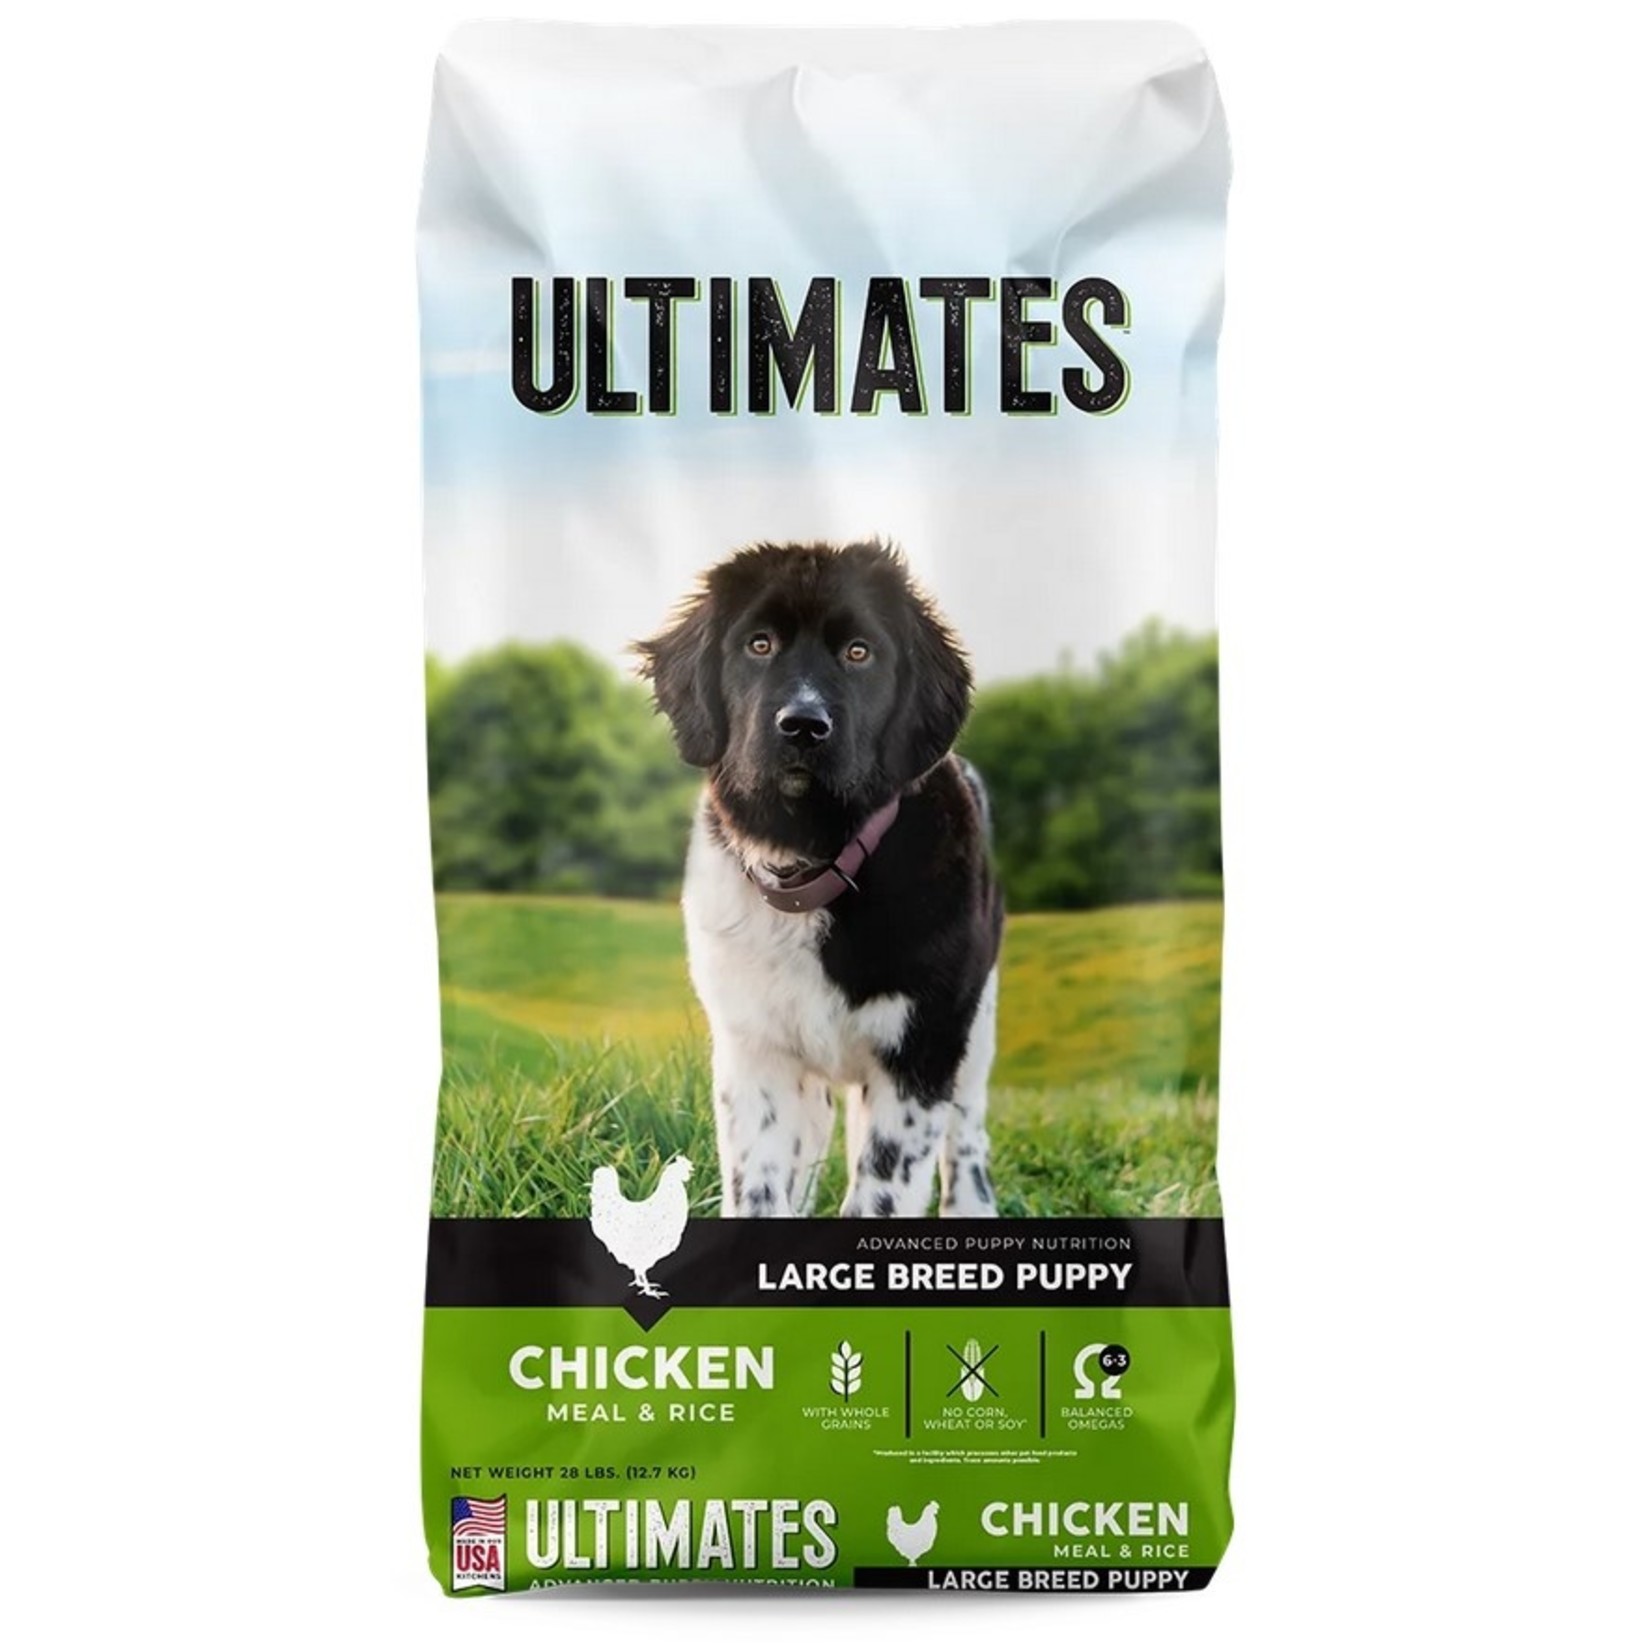 ProPac PROPAC Ultimates Chicken & Rice LG Breed Puppy